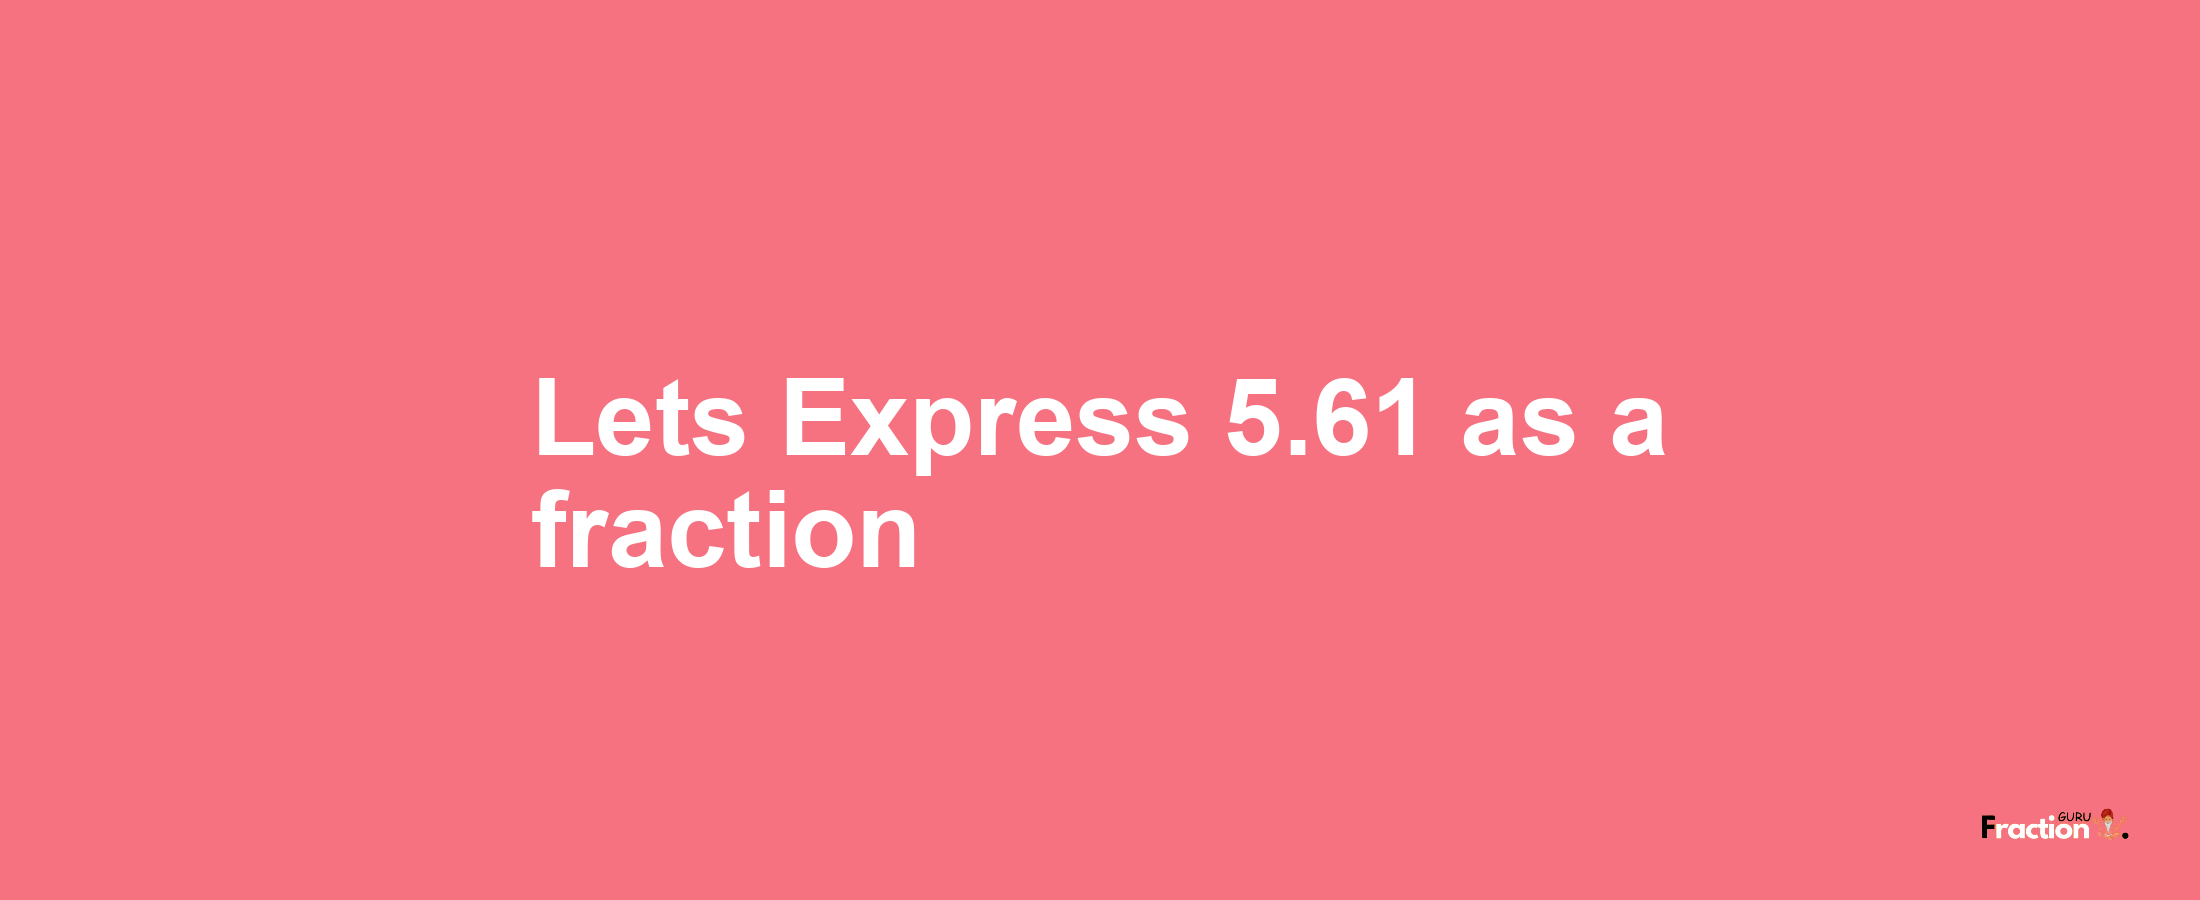 Lets Express 5.61 as afraction